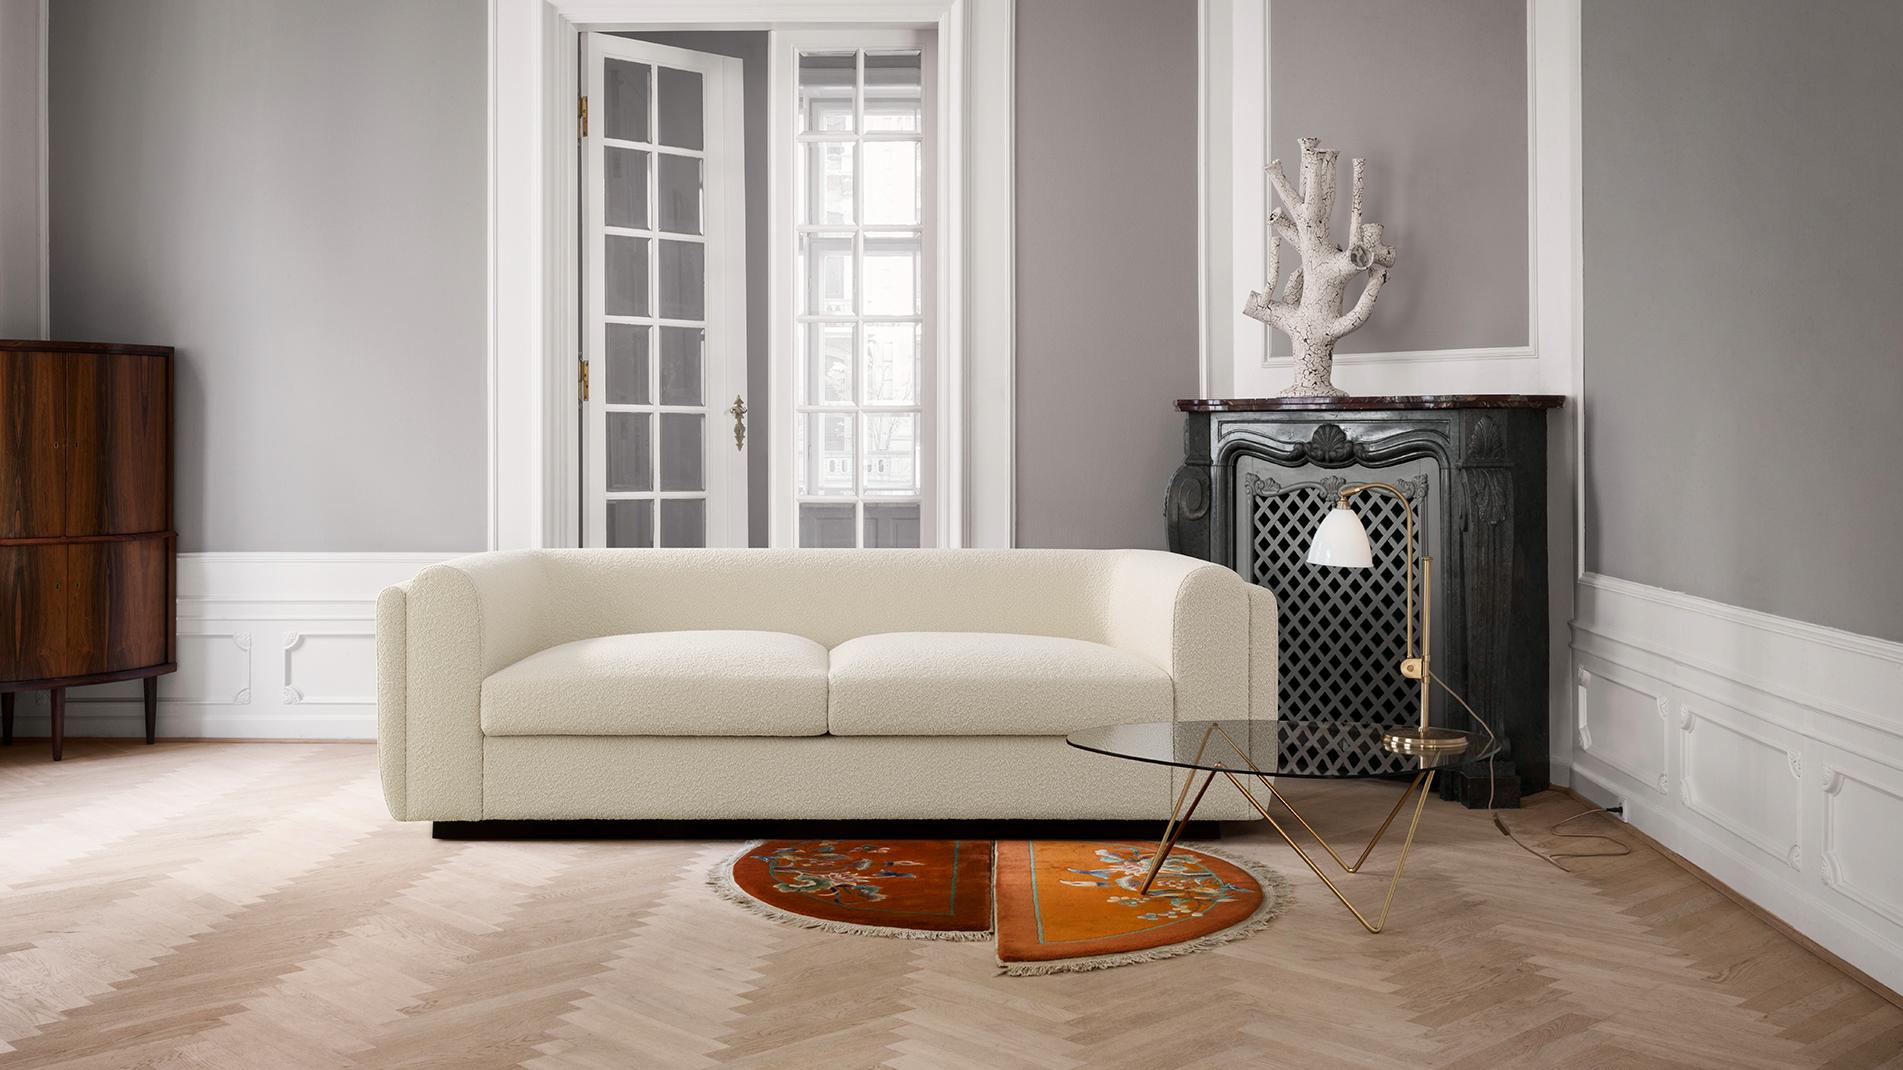 We specialize in chairs and sofas, offering high-quality pieces for your home or office.